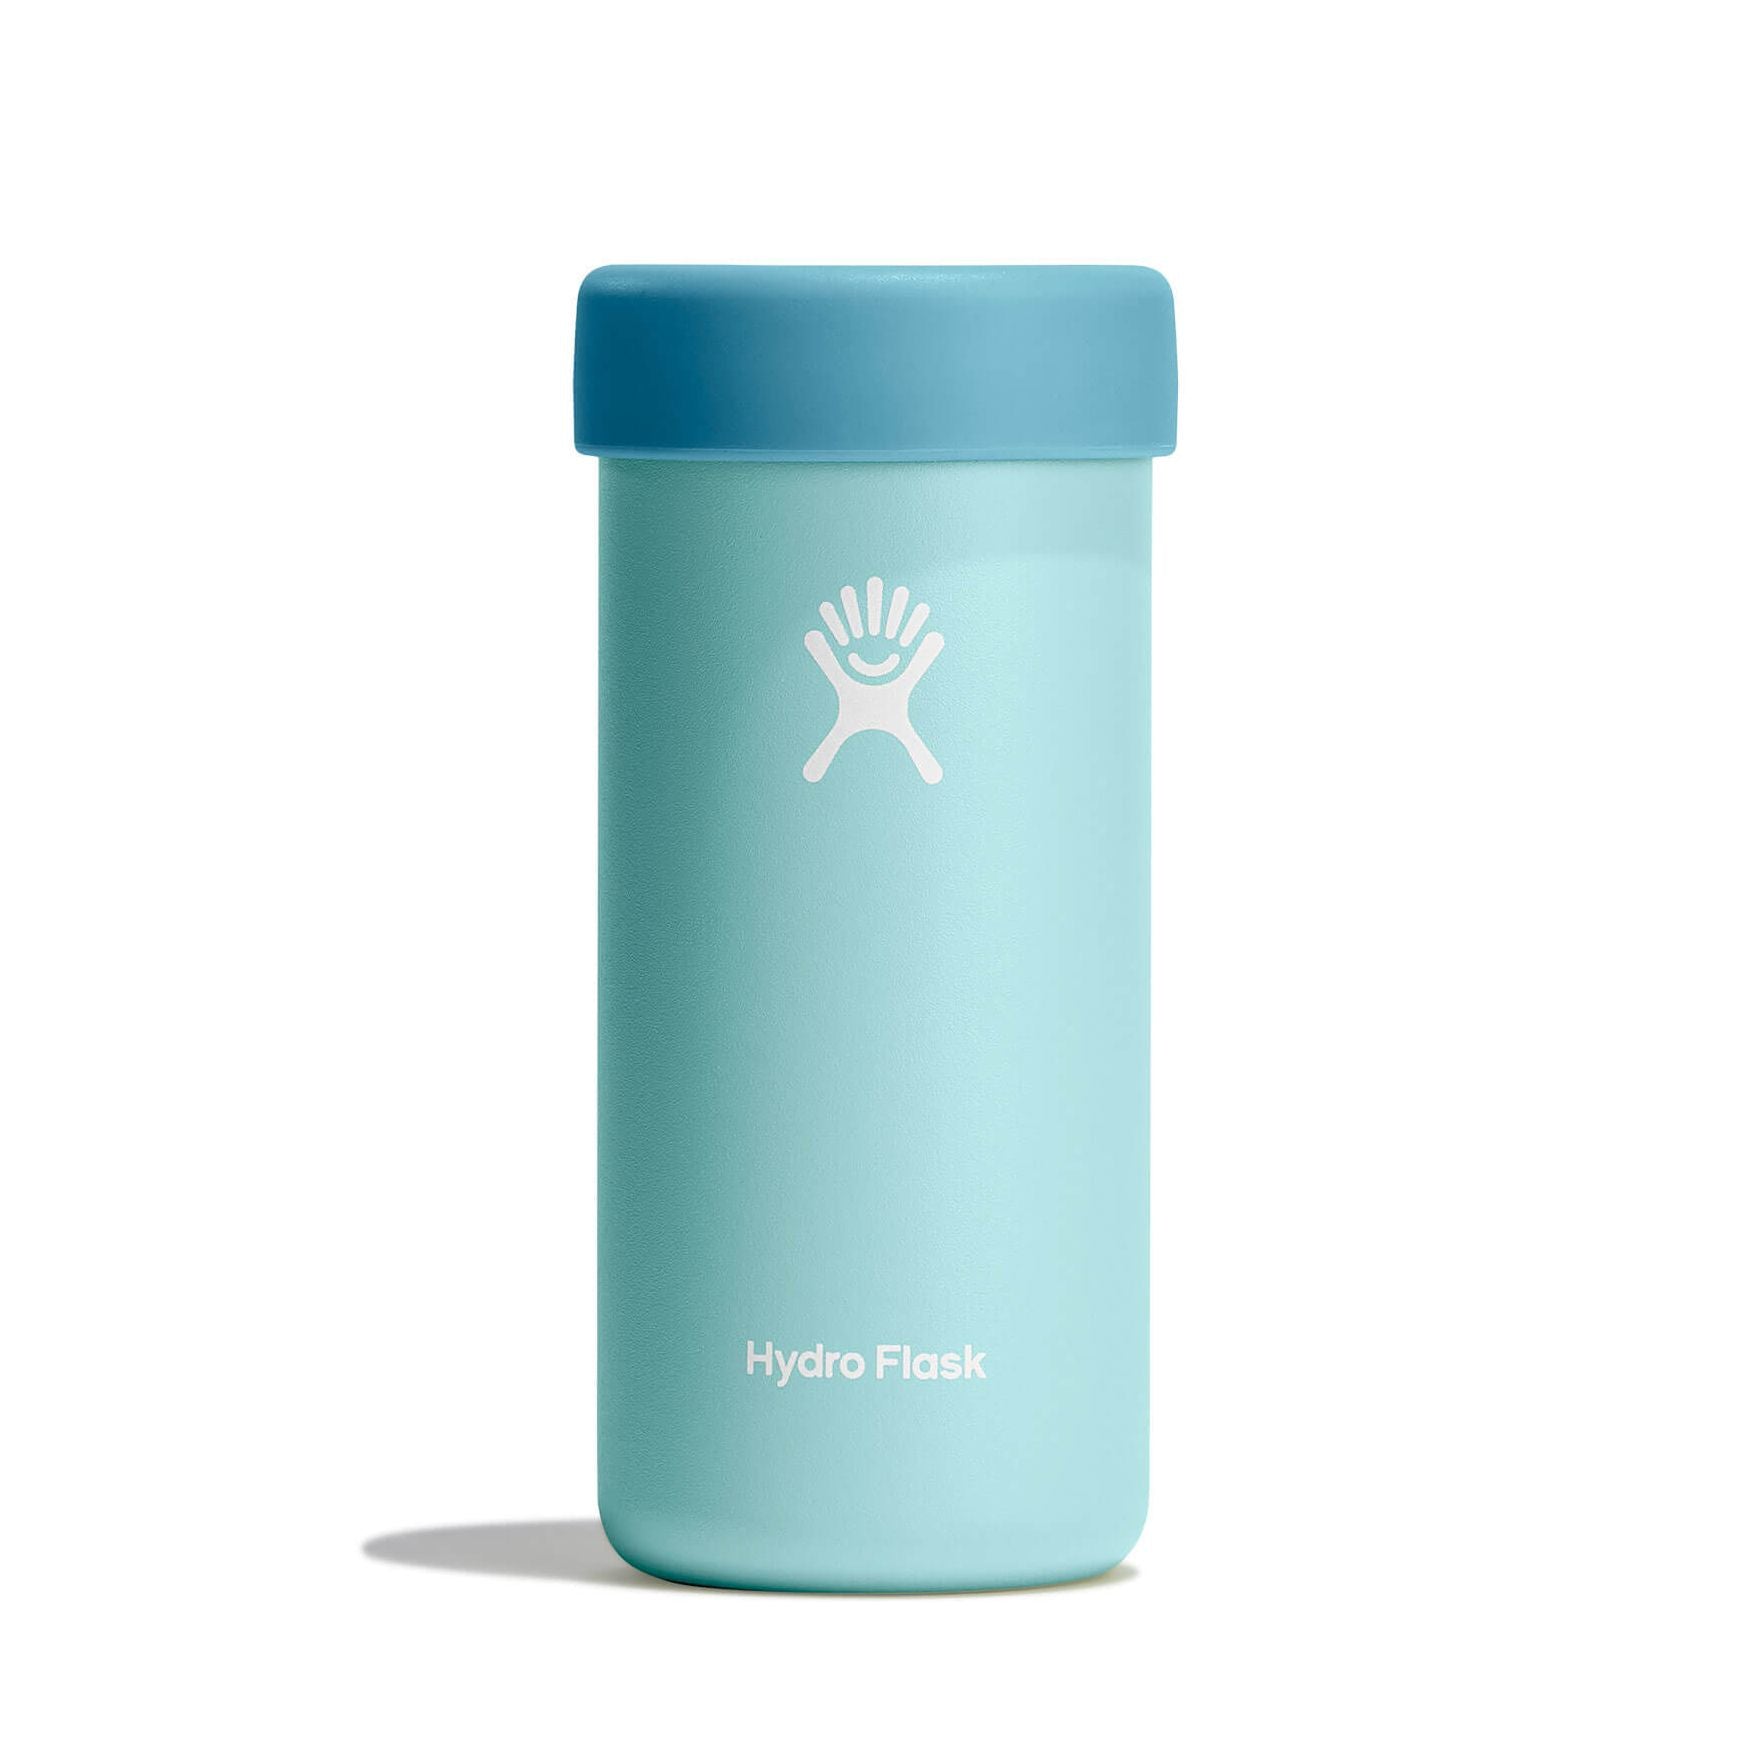 Hydro Flask Cooler Cup Review 